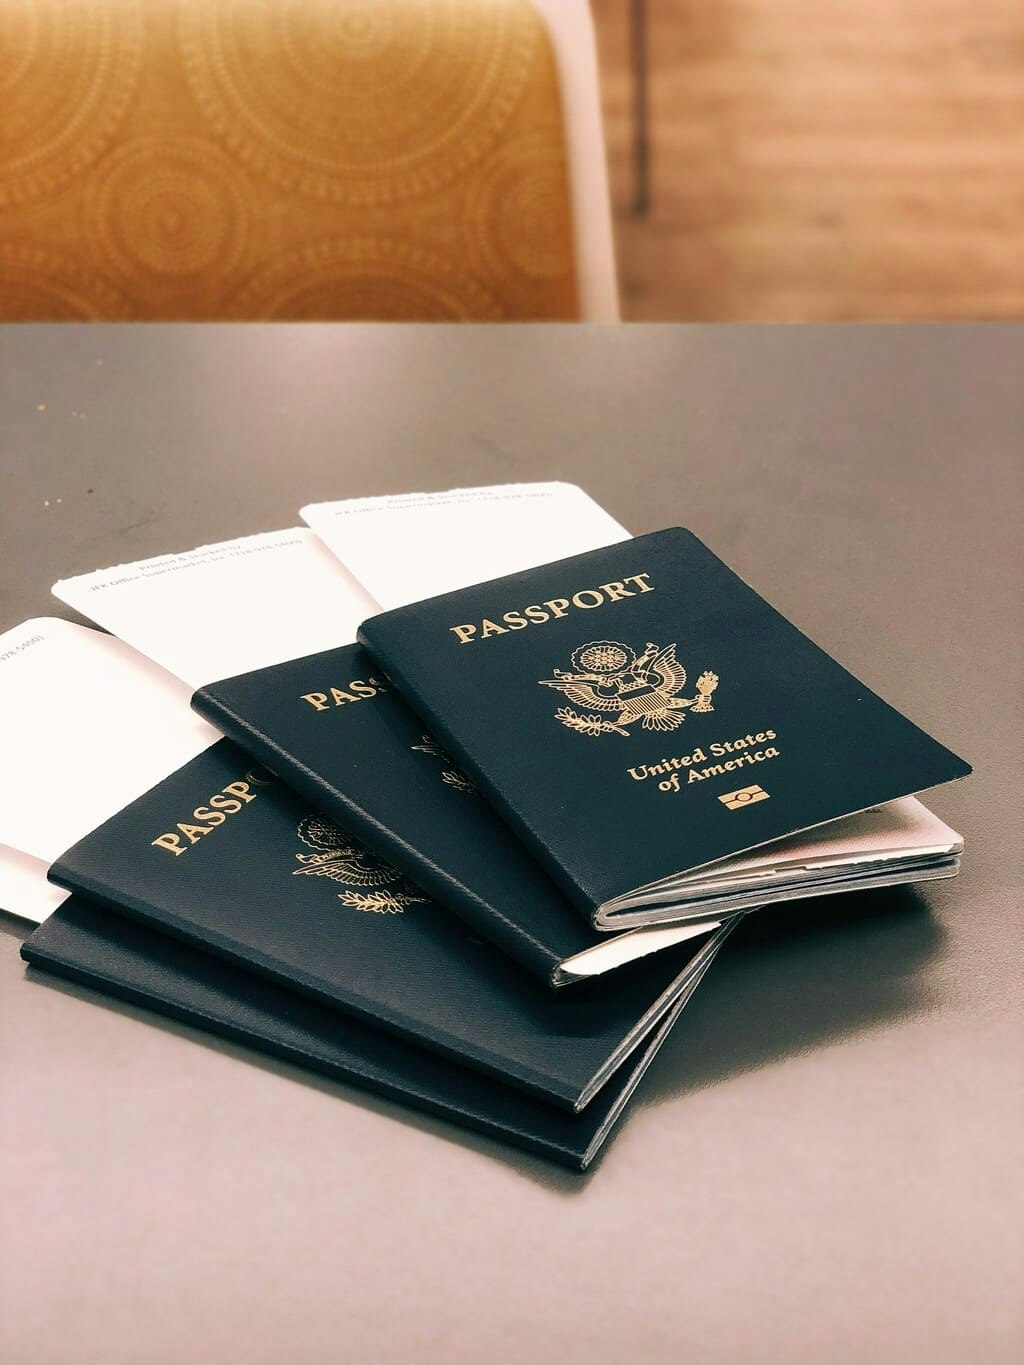 how long does it take for your passport to arrive